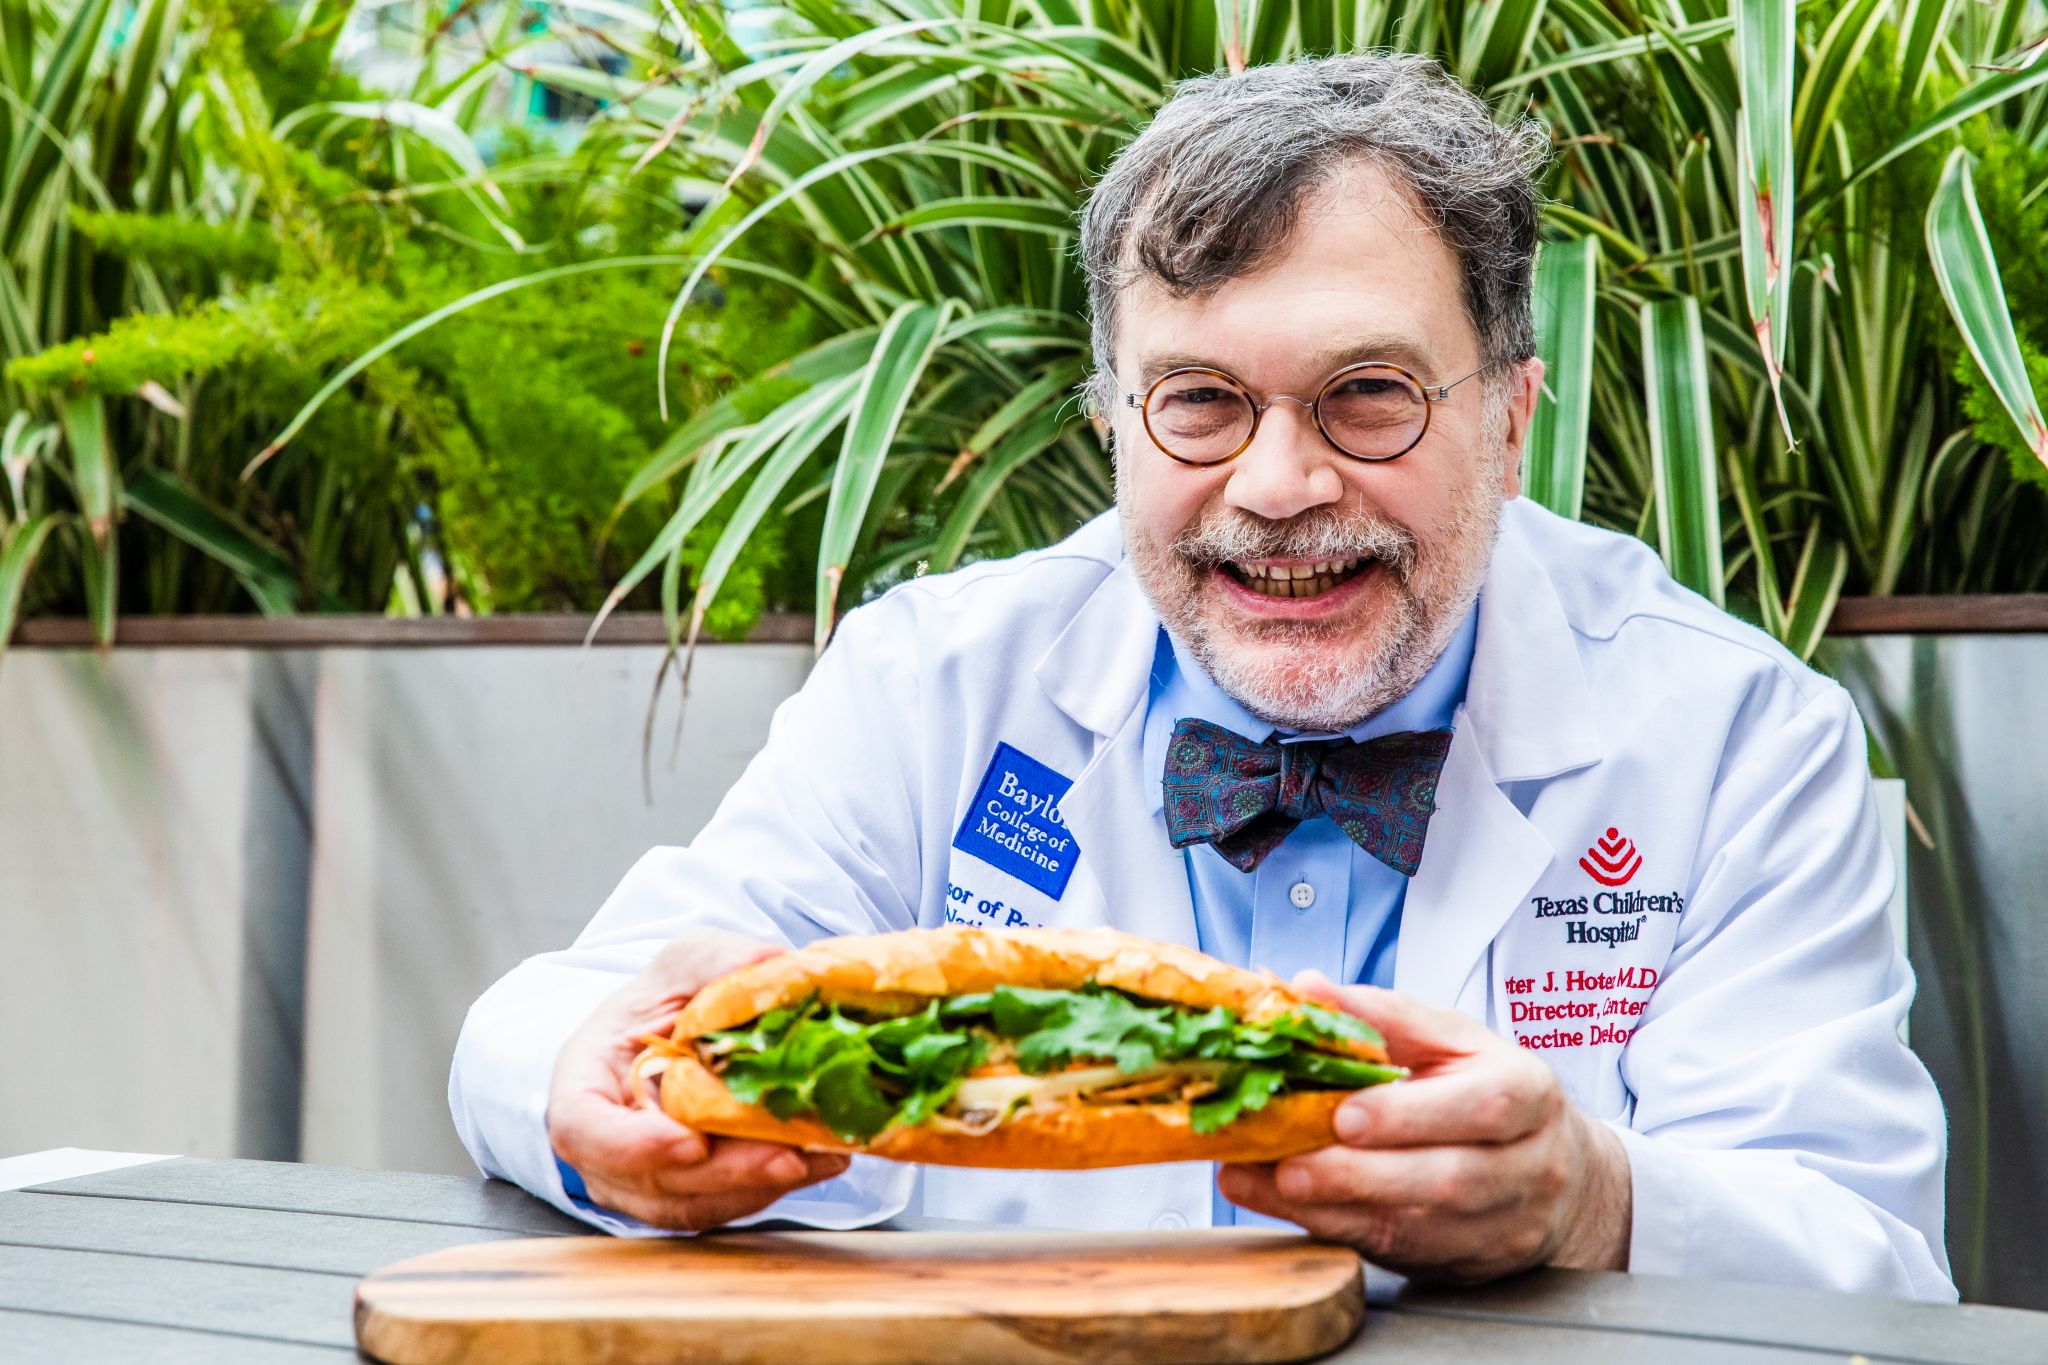 Houston’s leading infectious disease specialist officially has his own sandwich